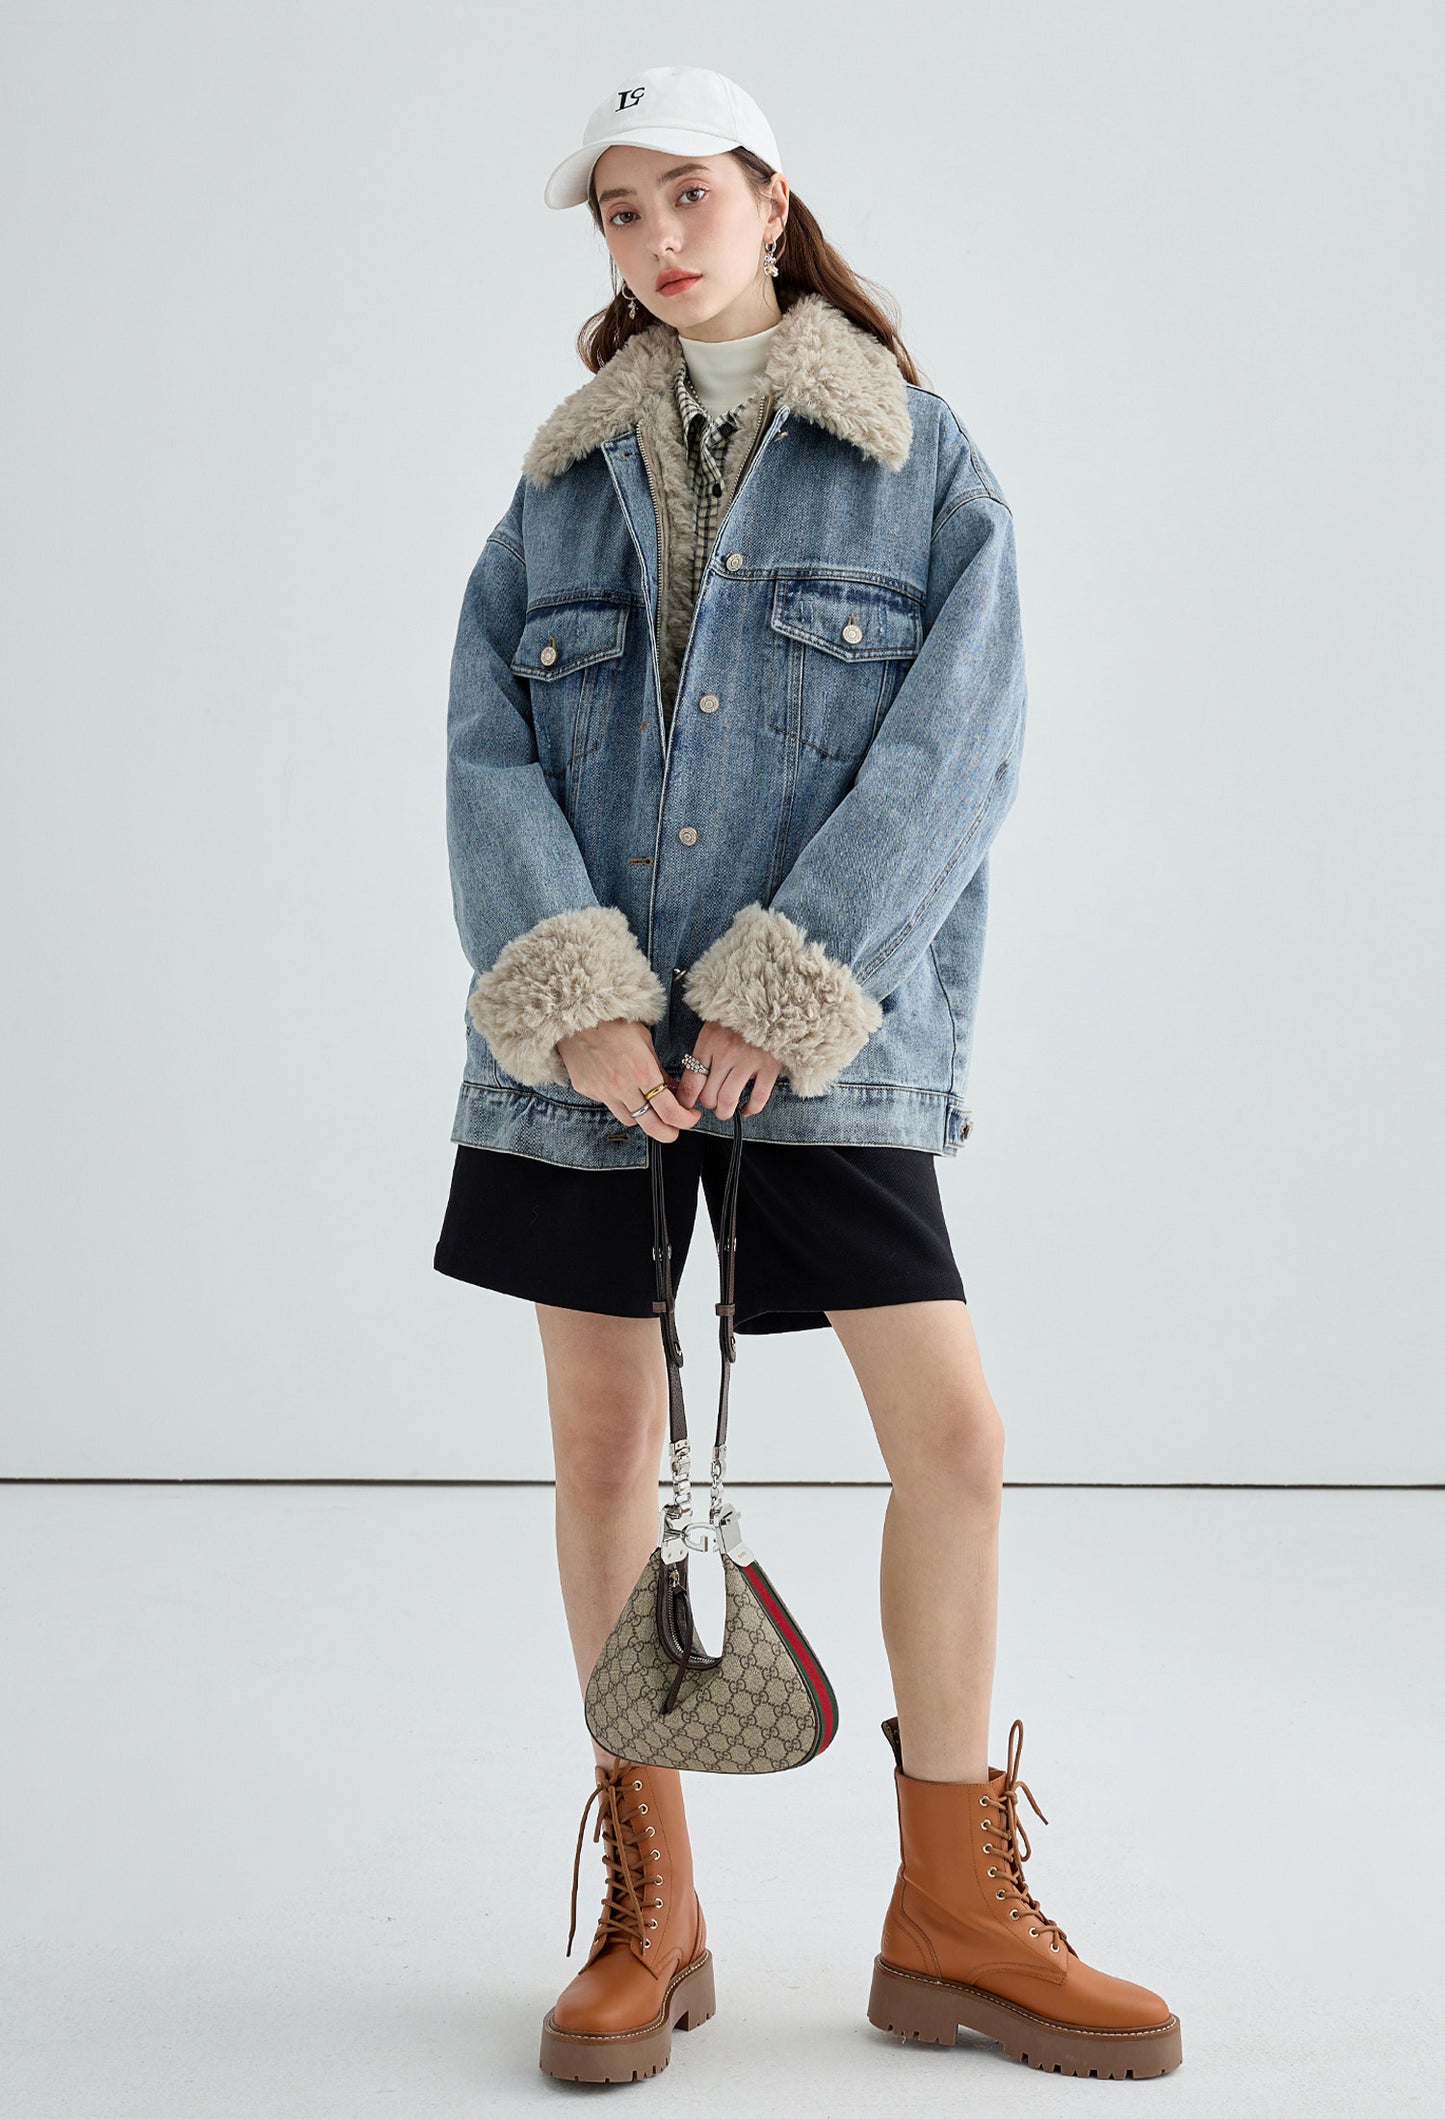 boa-liner-denim-jacket,simple,cool,cute,sexy,mode